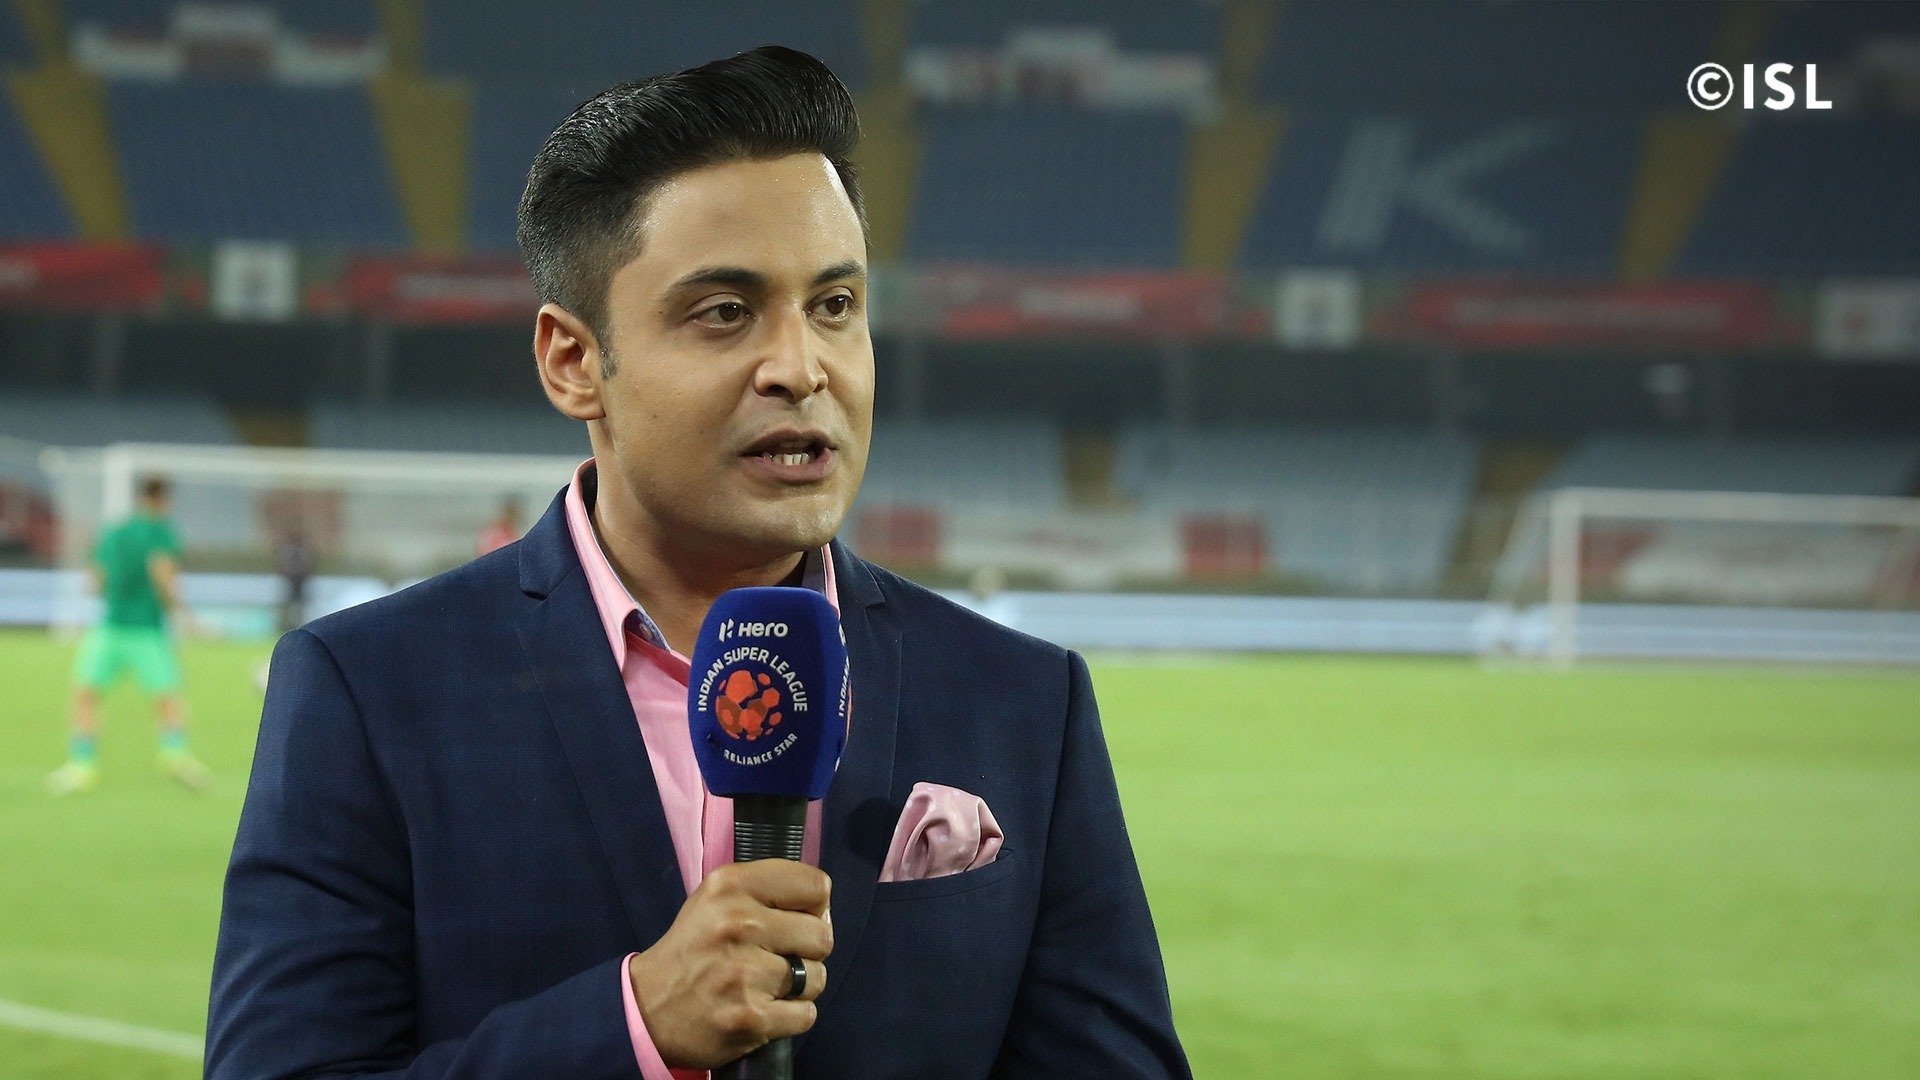 Anant Tyagi Anchoring Live, Pitch Side - Player , HD Wallpaper & Backgrounds